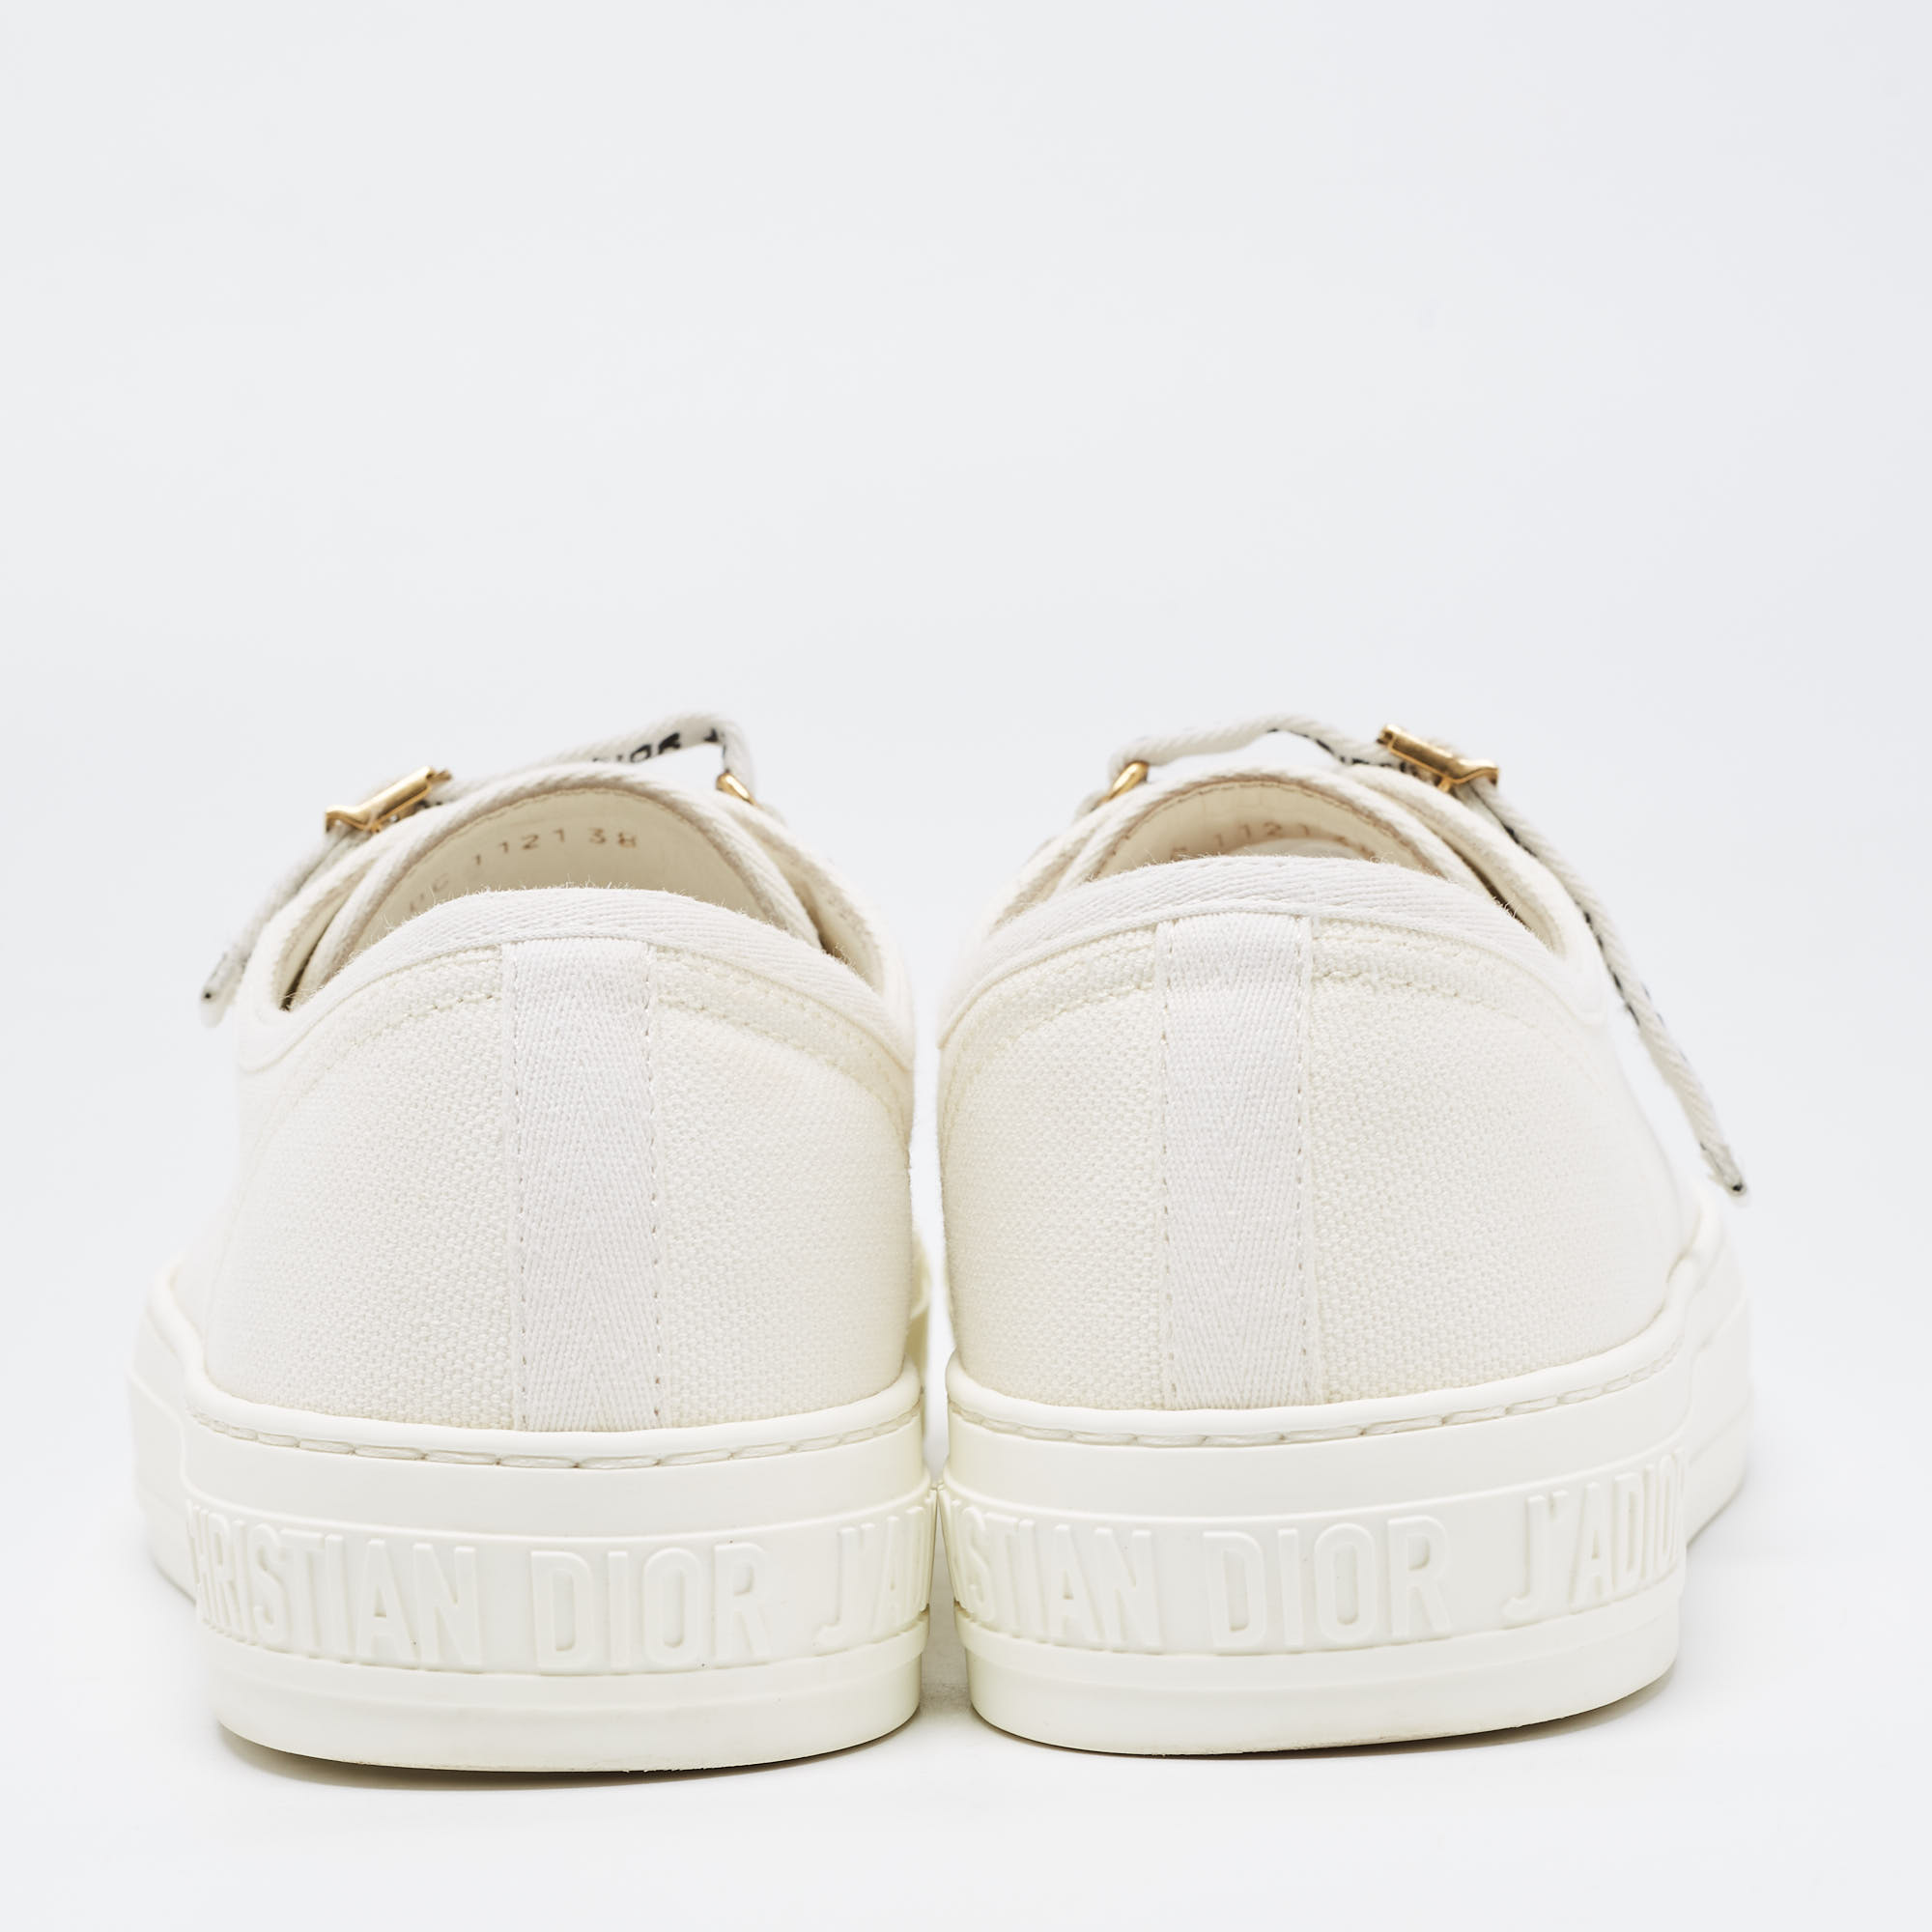 Dior White Canvas Walk'n'Dior Low Top Sneakers Size 38